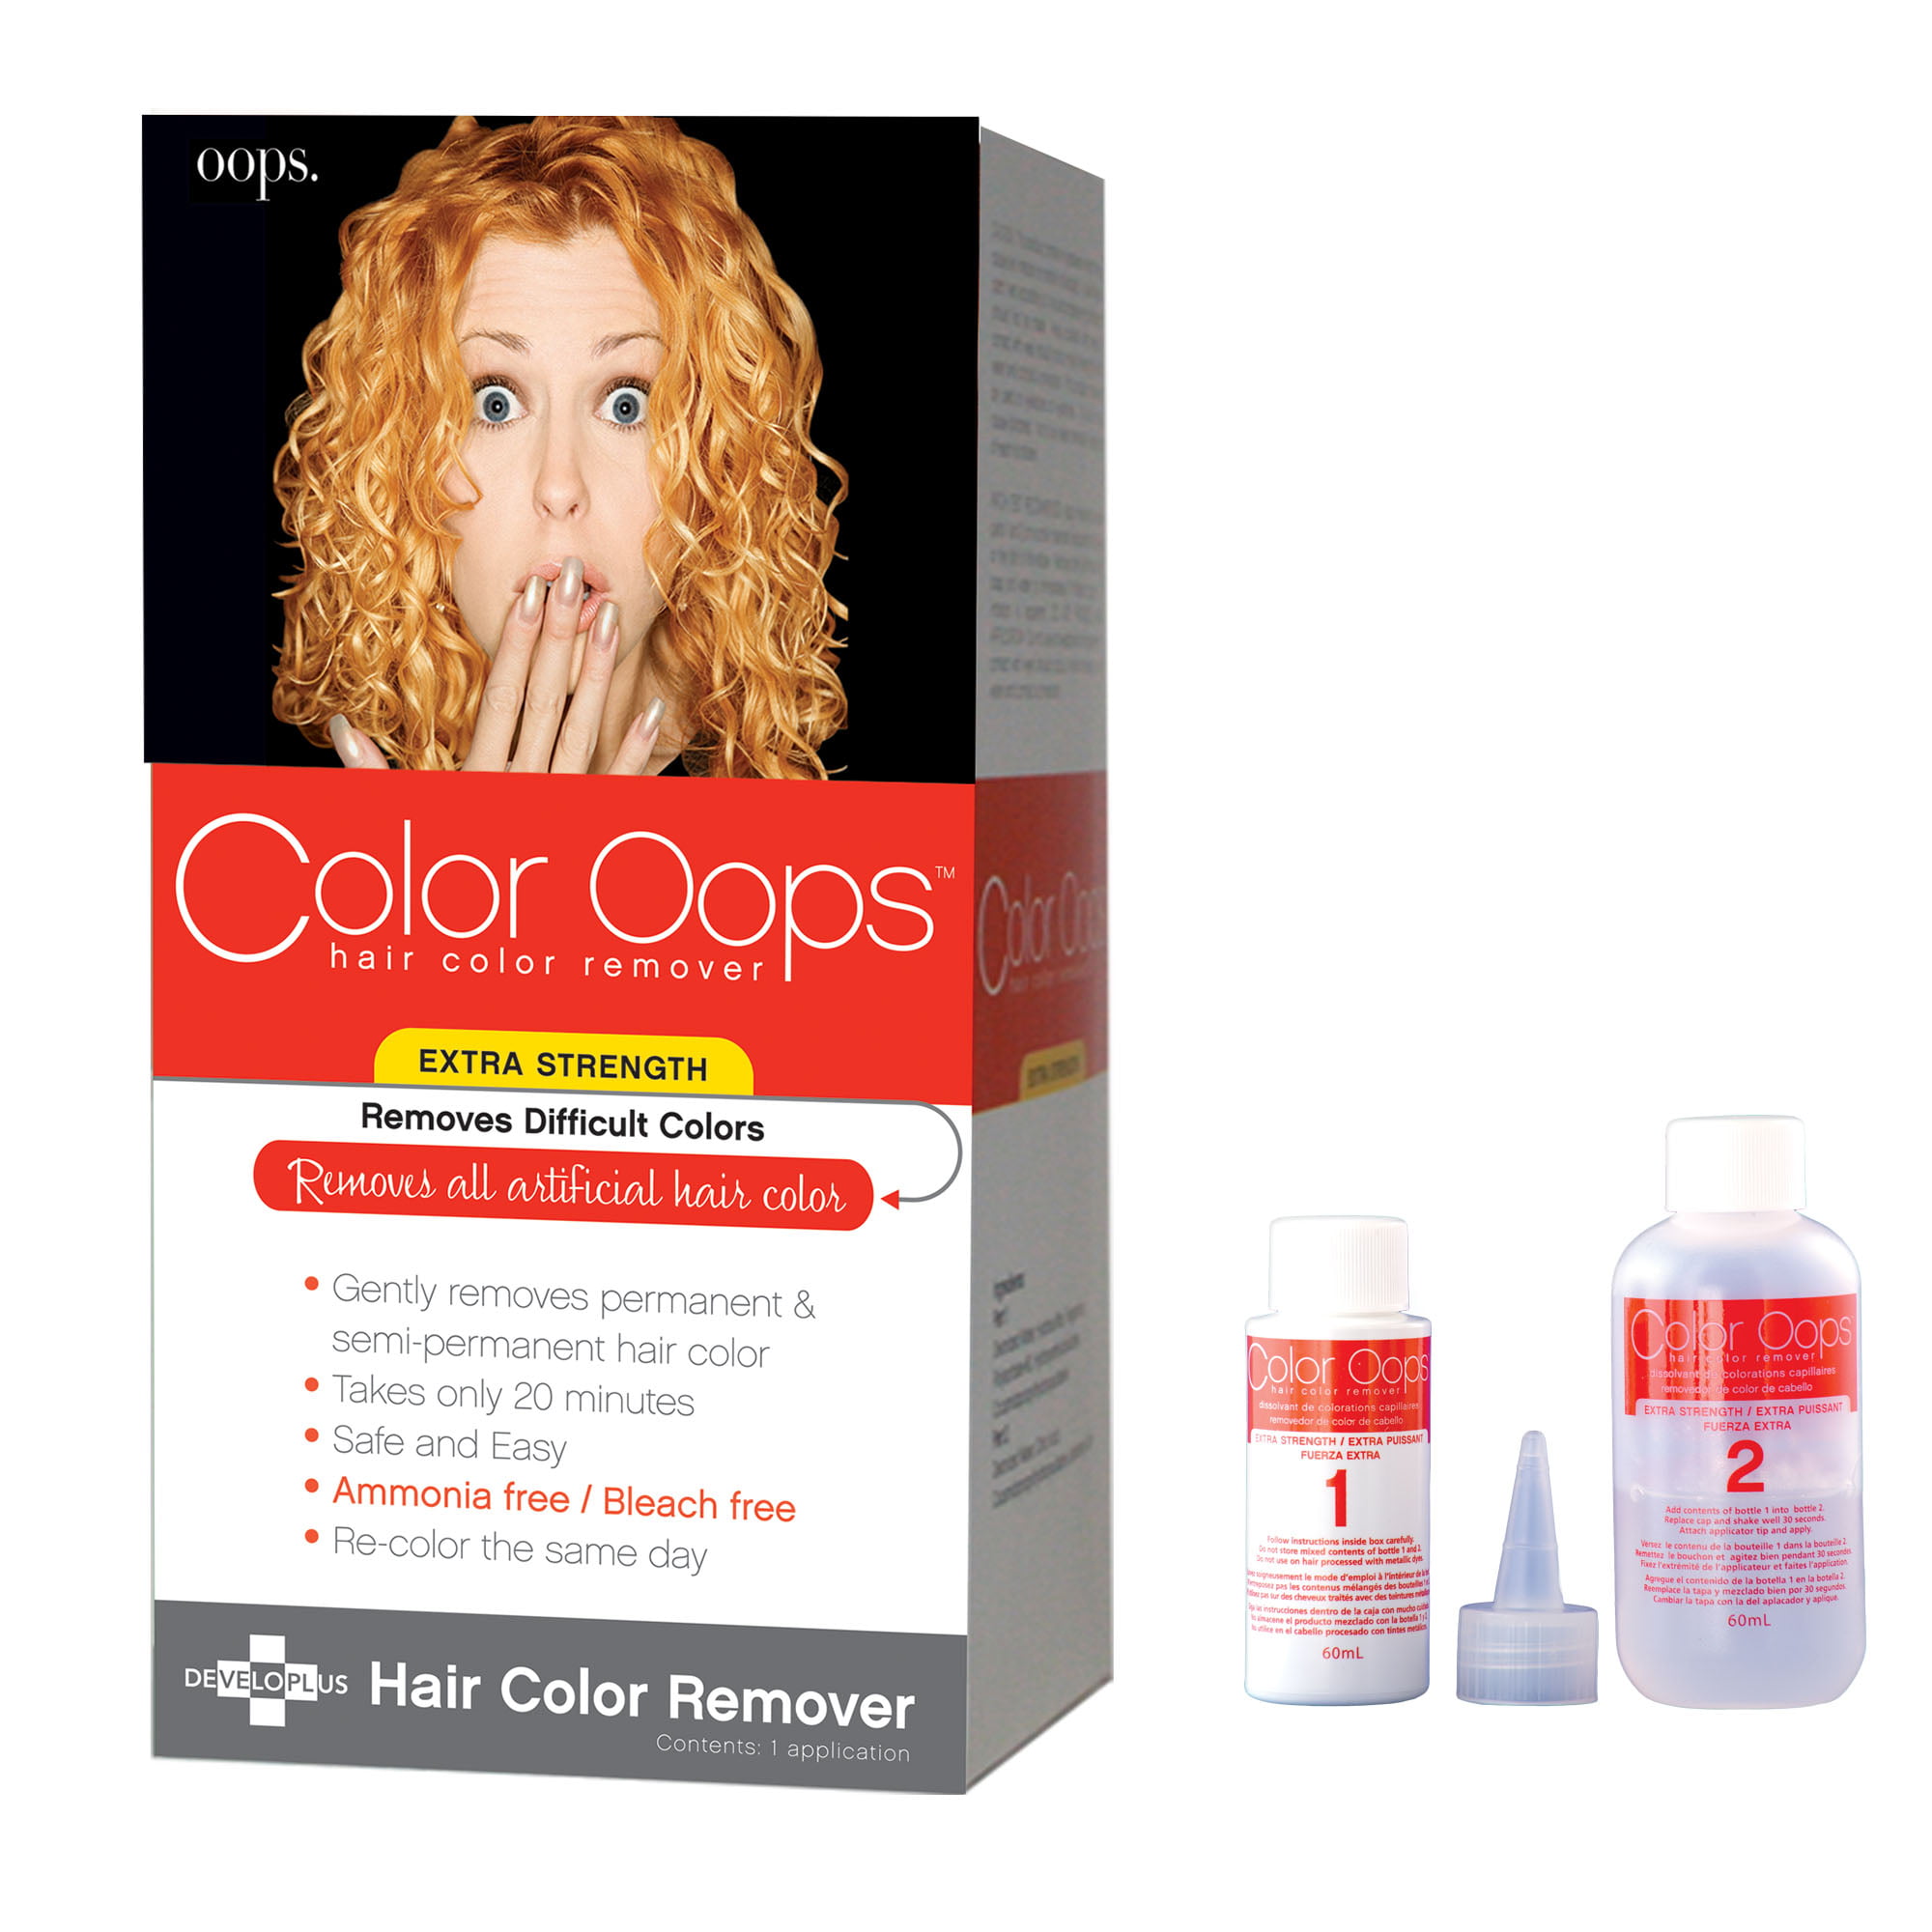 Hair Color Shampoo Walmart Trendy Hairstyles In The USA